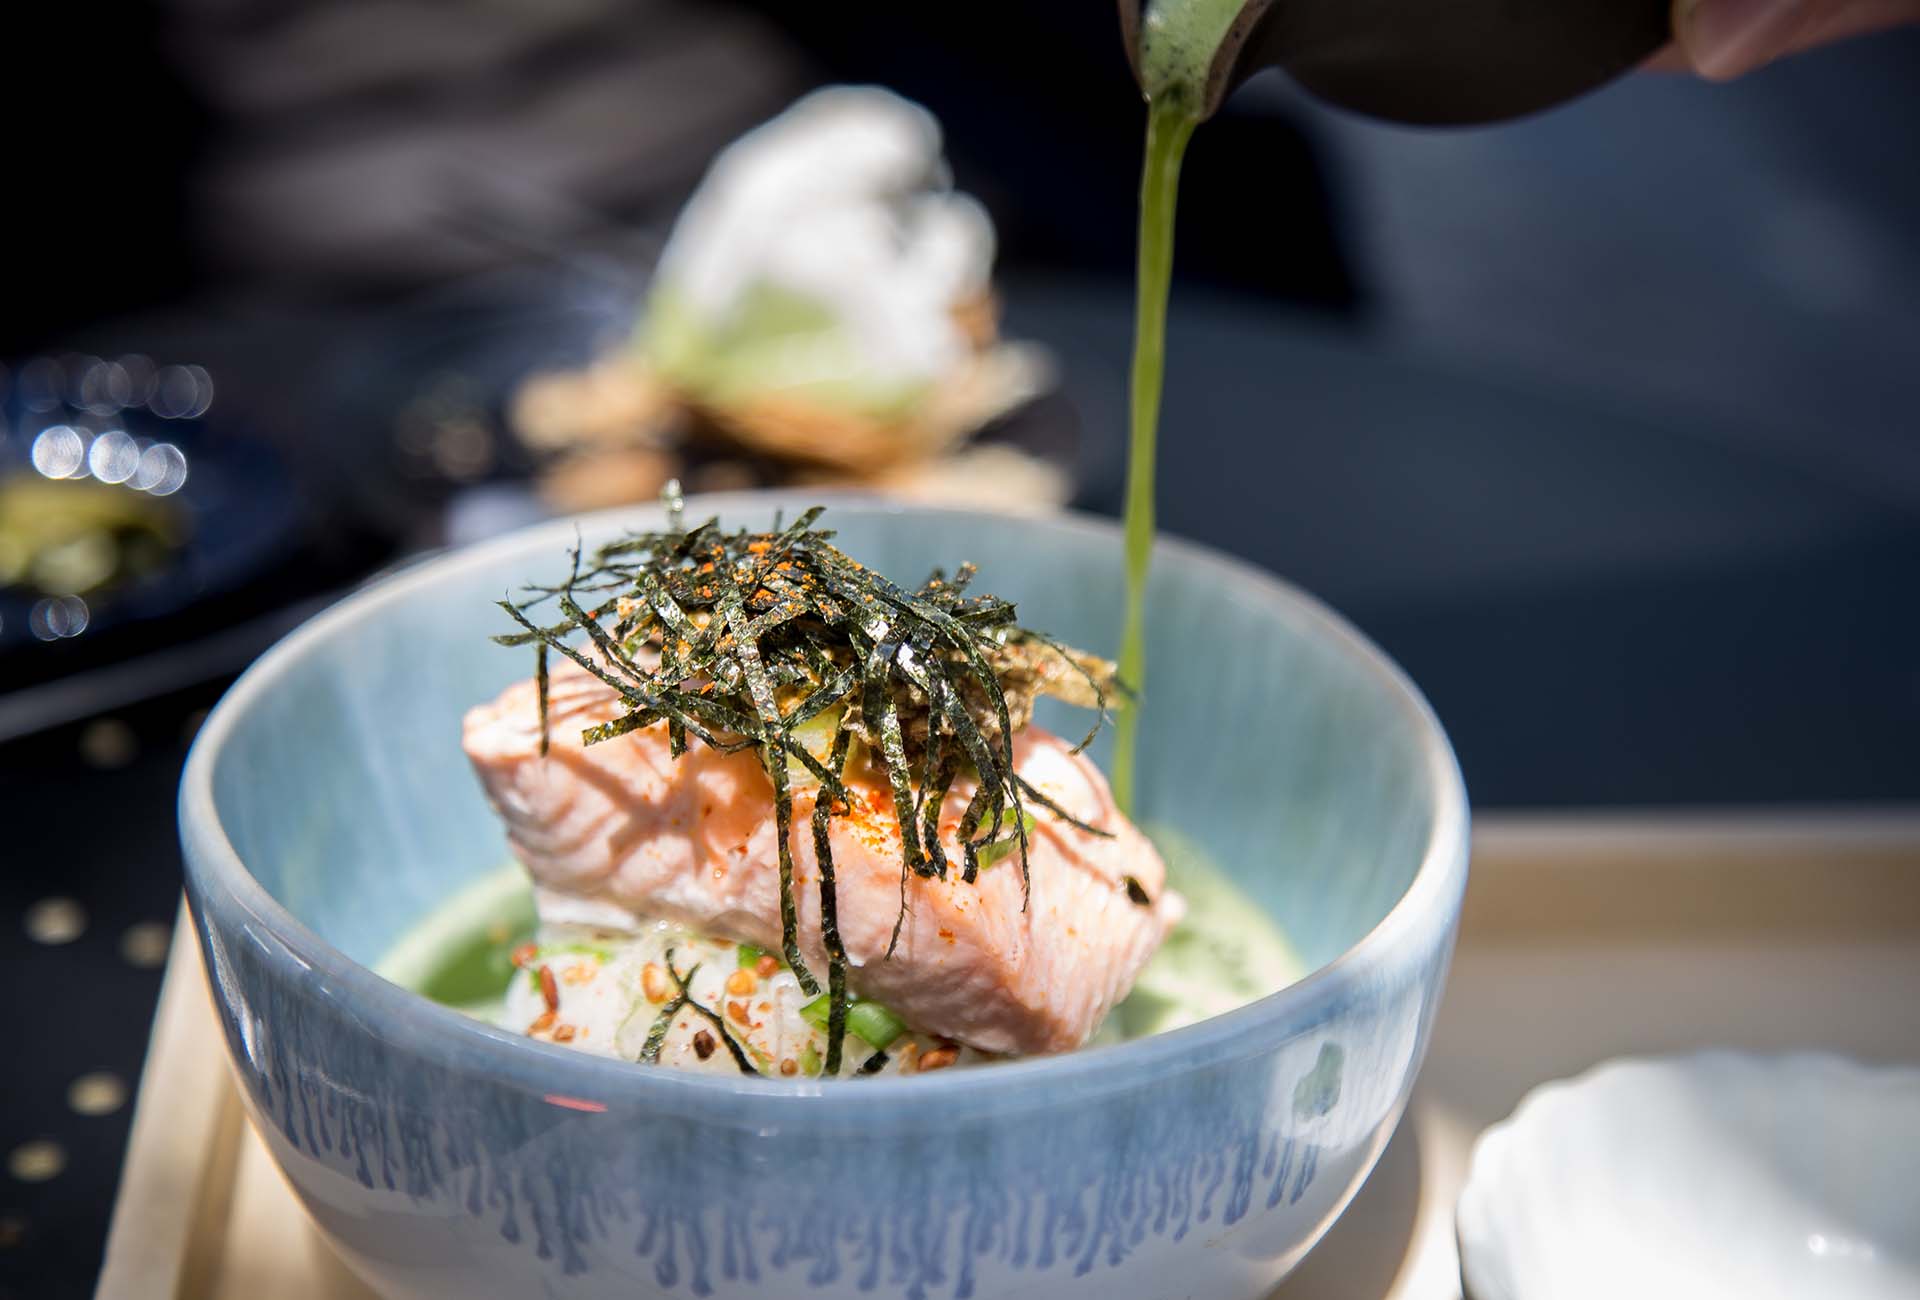 The Matchazuke is essentially a rice bowl with salmon and doused in chicken dashi and matcha tea